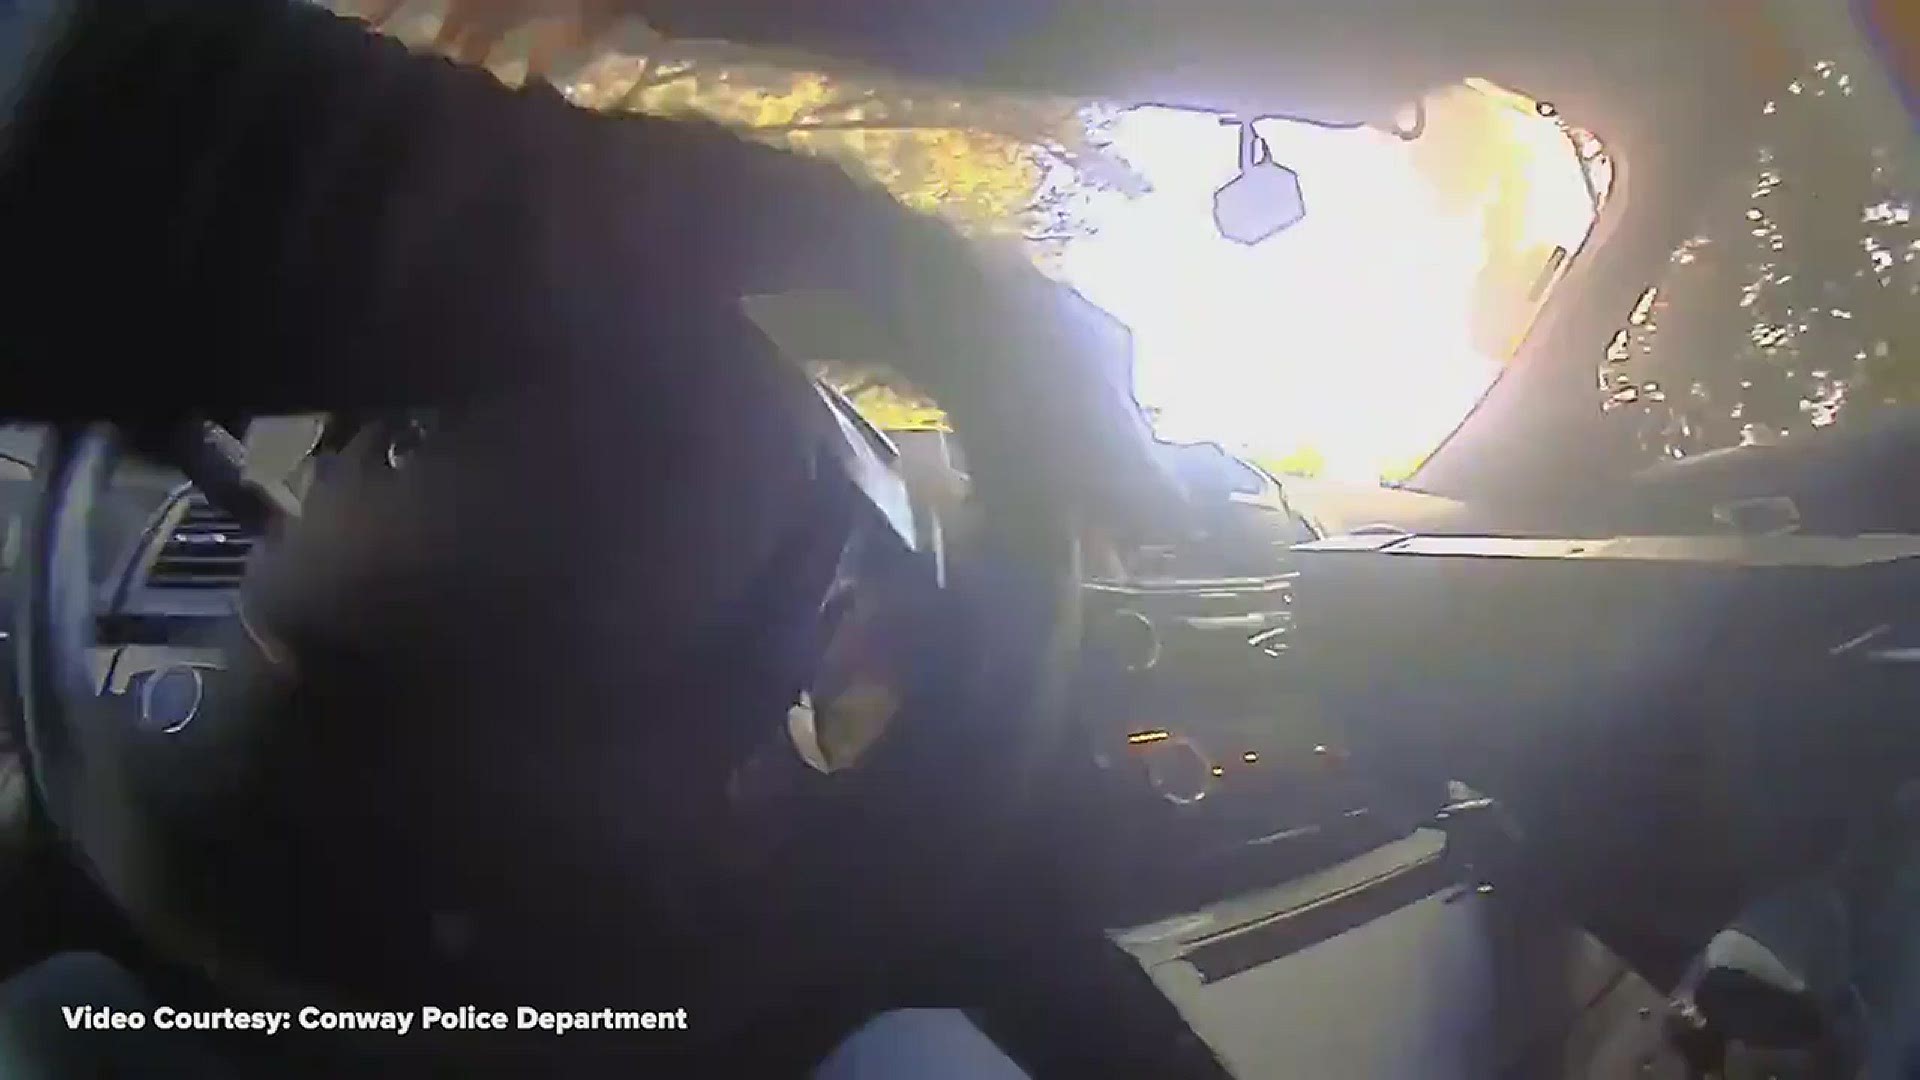 The Conway Police Department shared a video of an officer saving two people and their dog from a house fire.